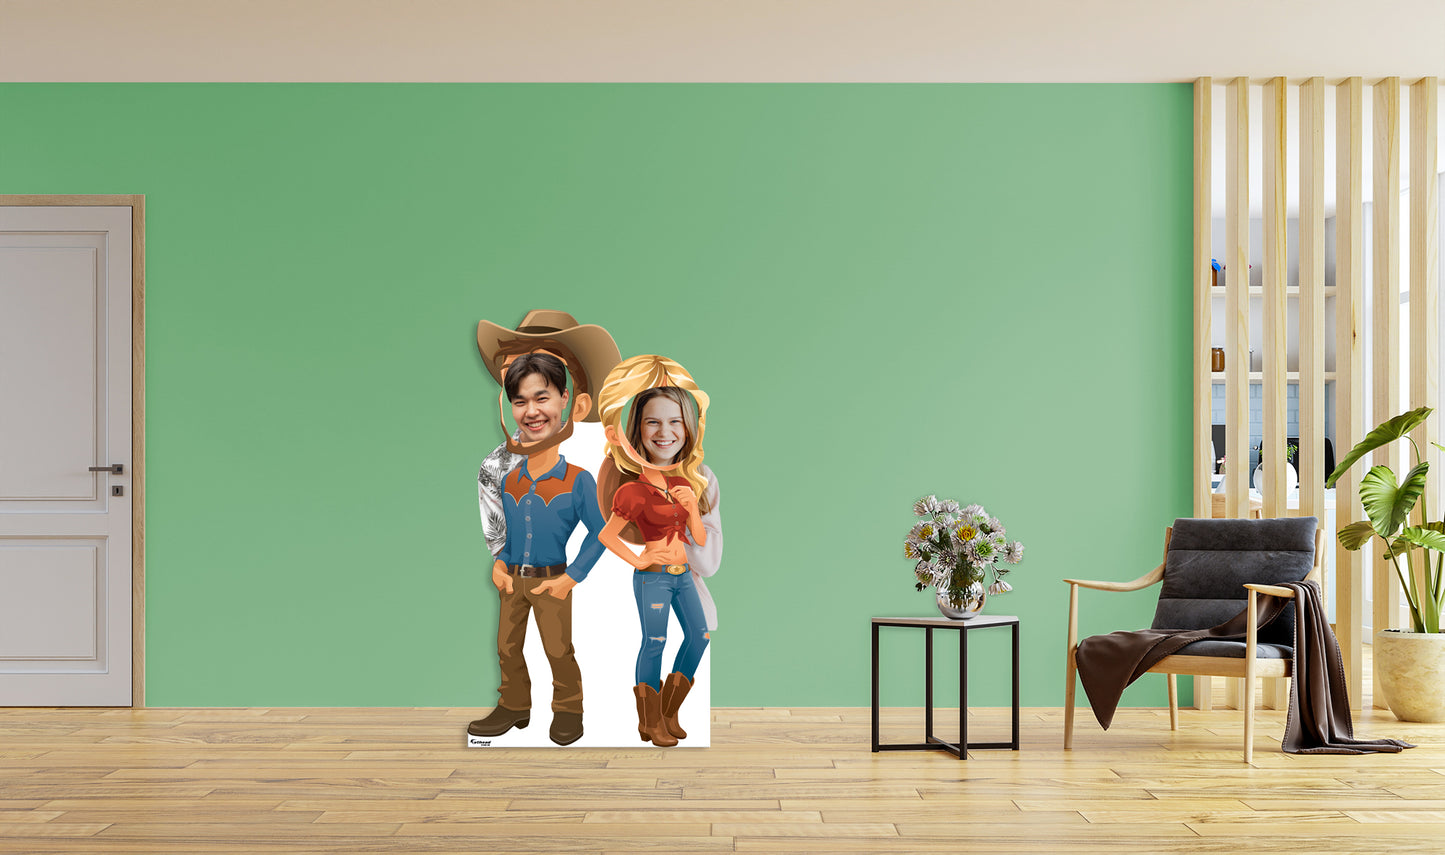 Cowboy: Cowboy and Cowgirl Stand In   Foam Core Cutout  -      Stand Out